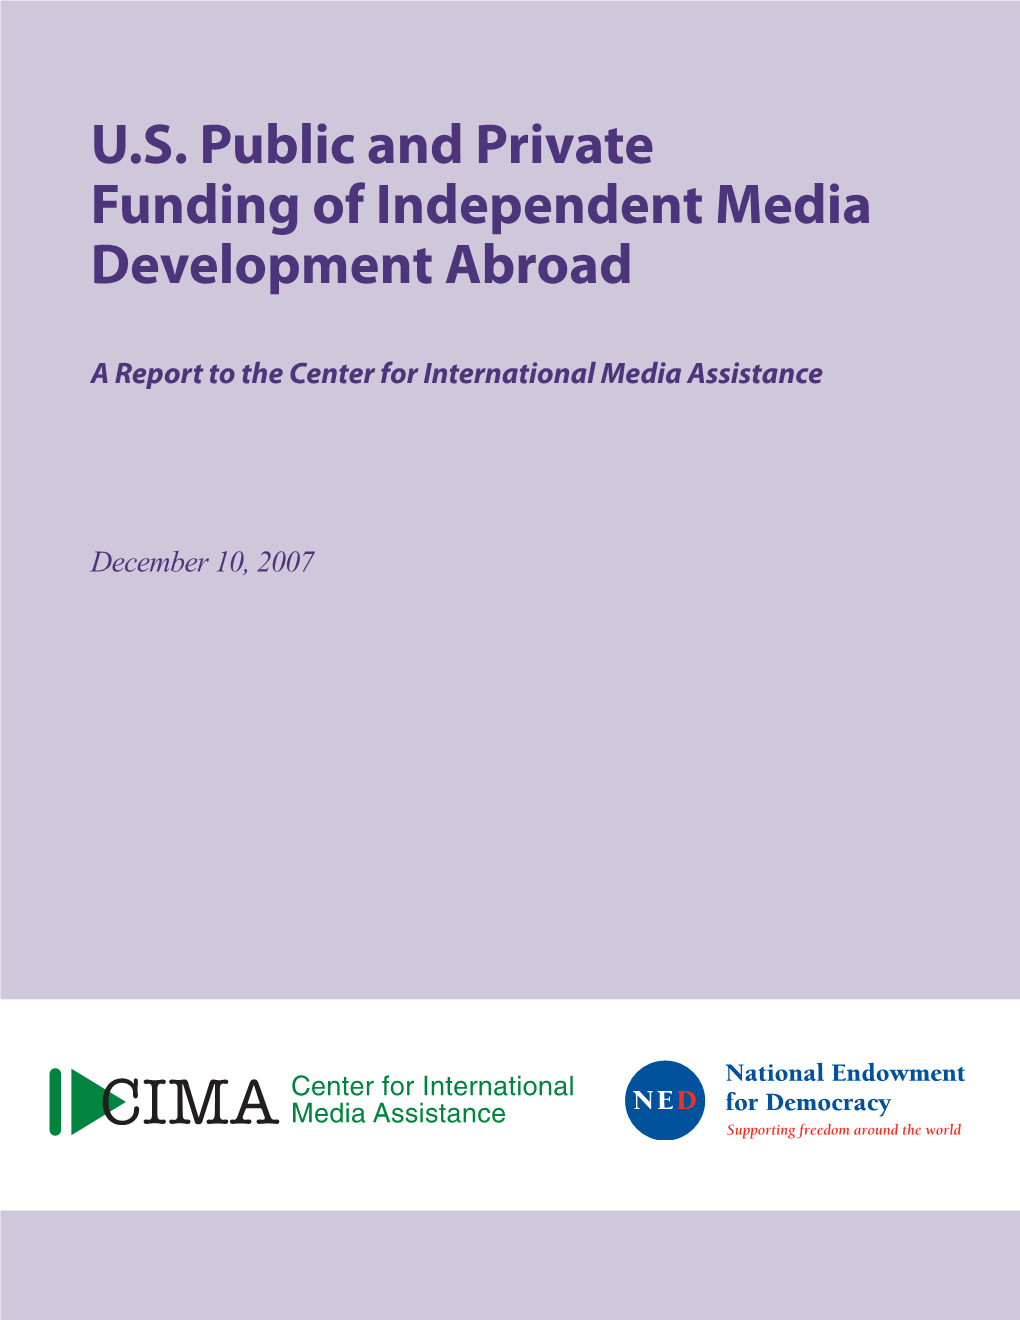 U.S. Public and Private Funding of Independent Media Development Abroad